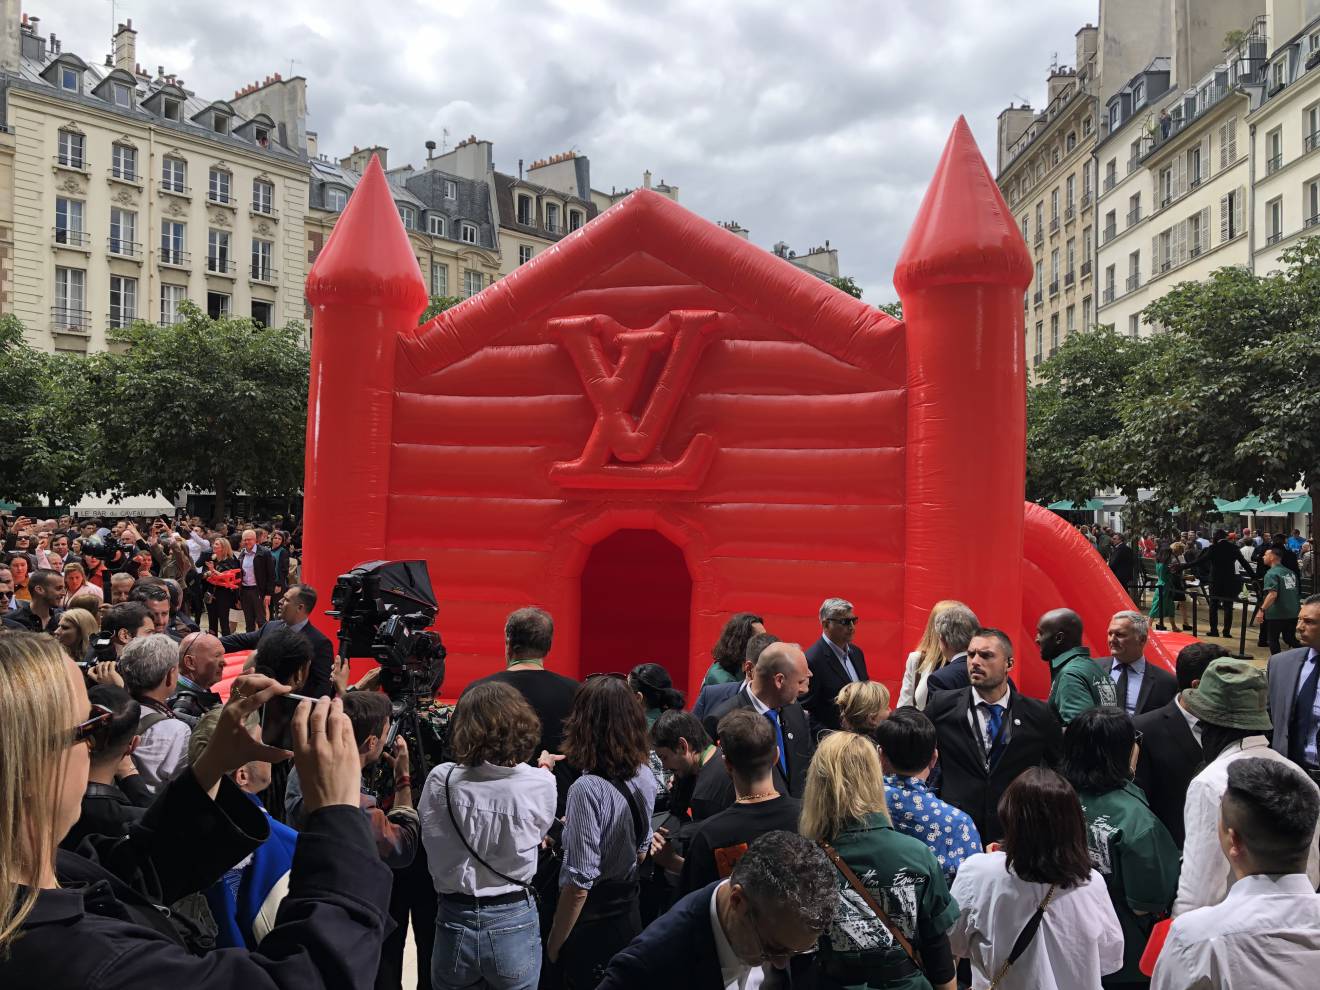 A red bouncy castle in the middle of a beautiful square in Paris